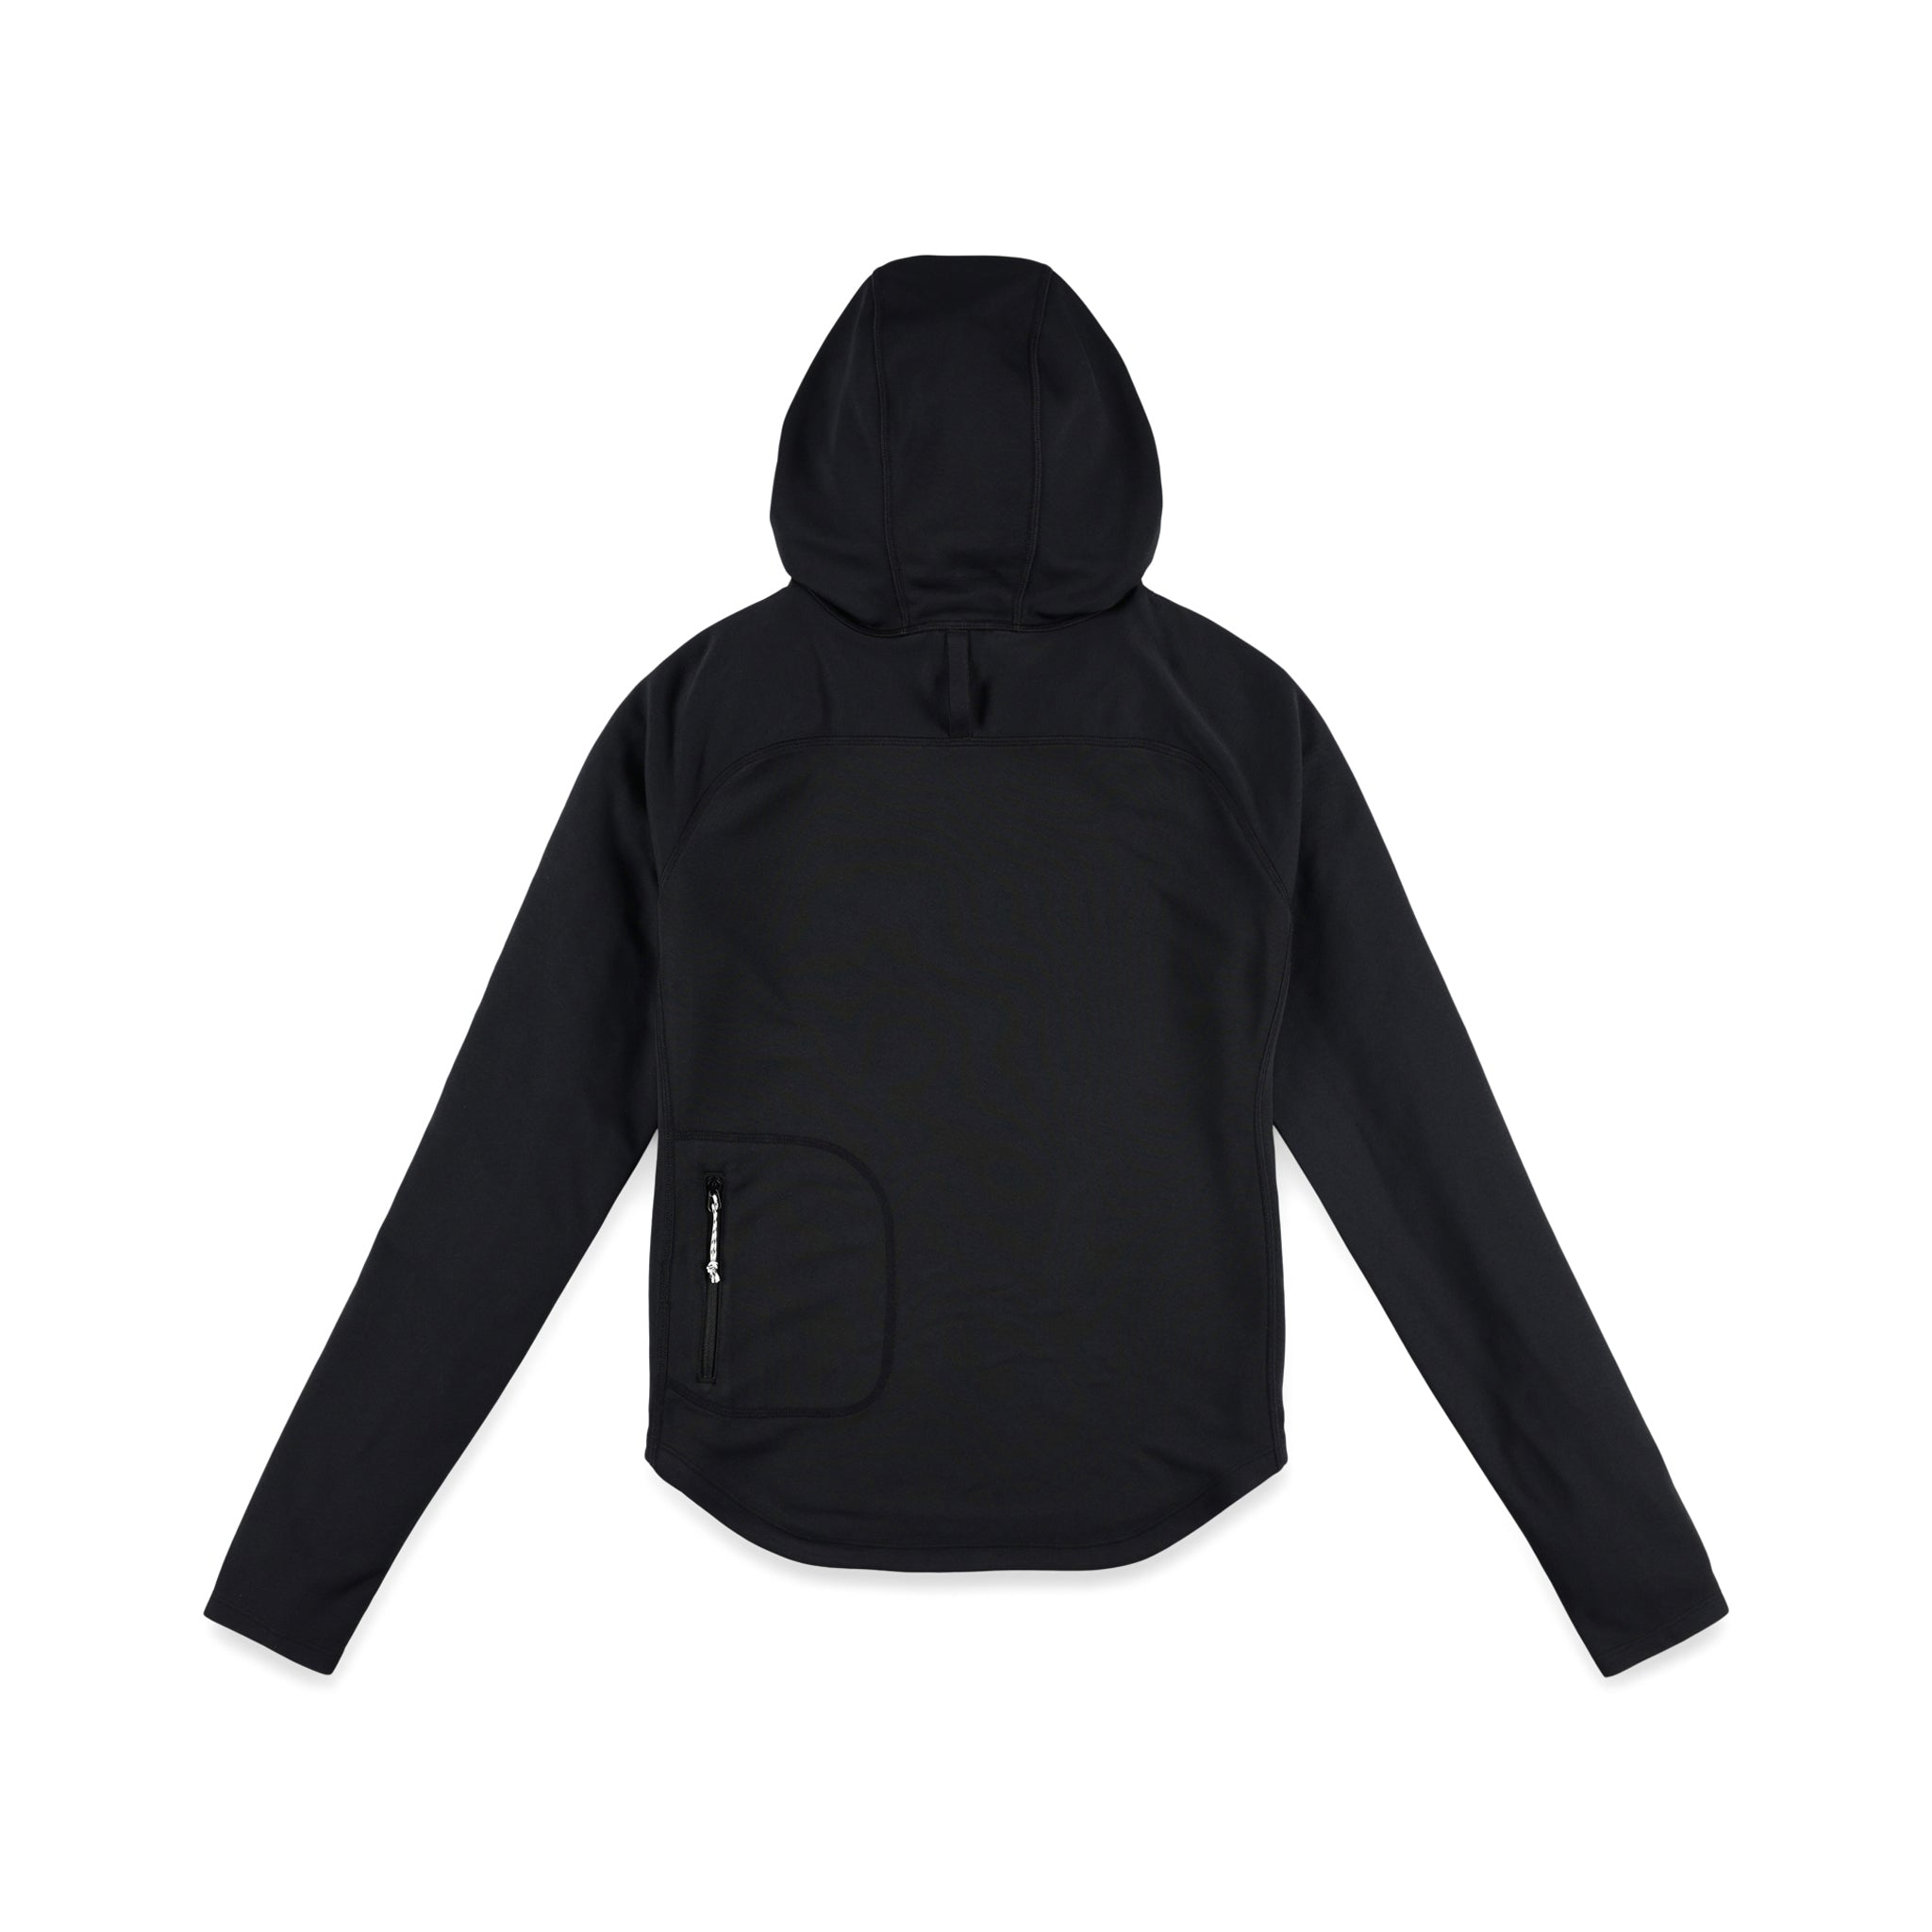 Back of Topo Designs Women's River Hoodie 30+ UPF rated moisture wicking water shirt in "Black".